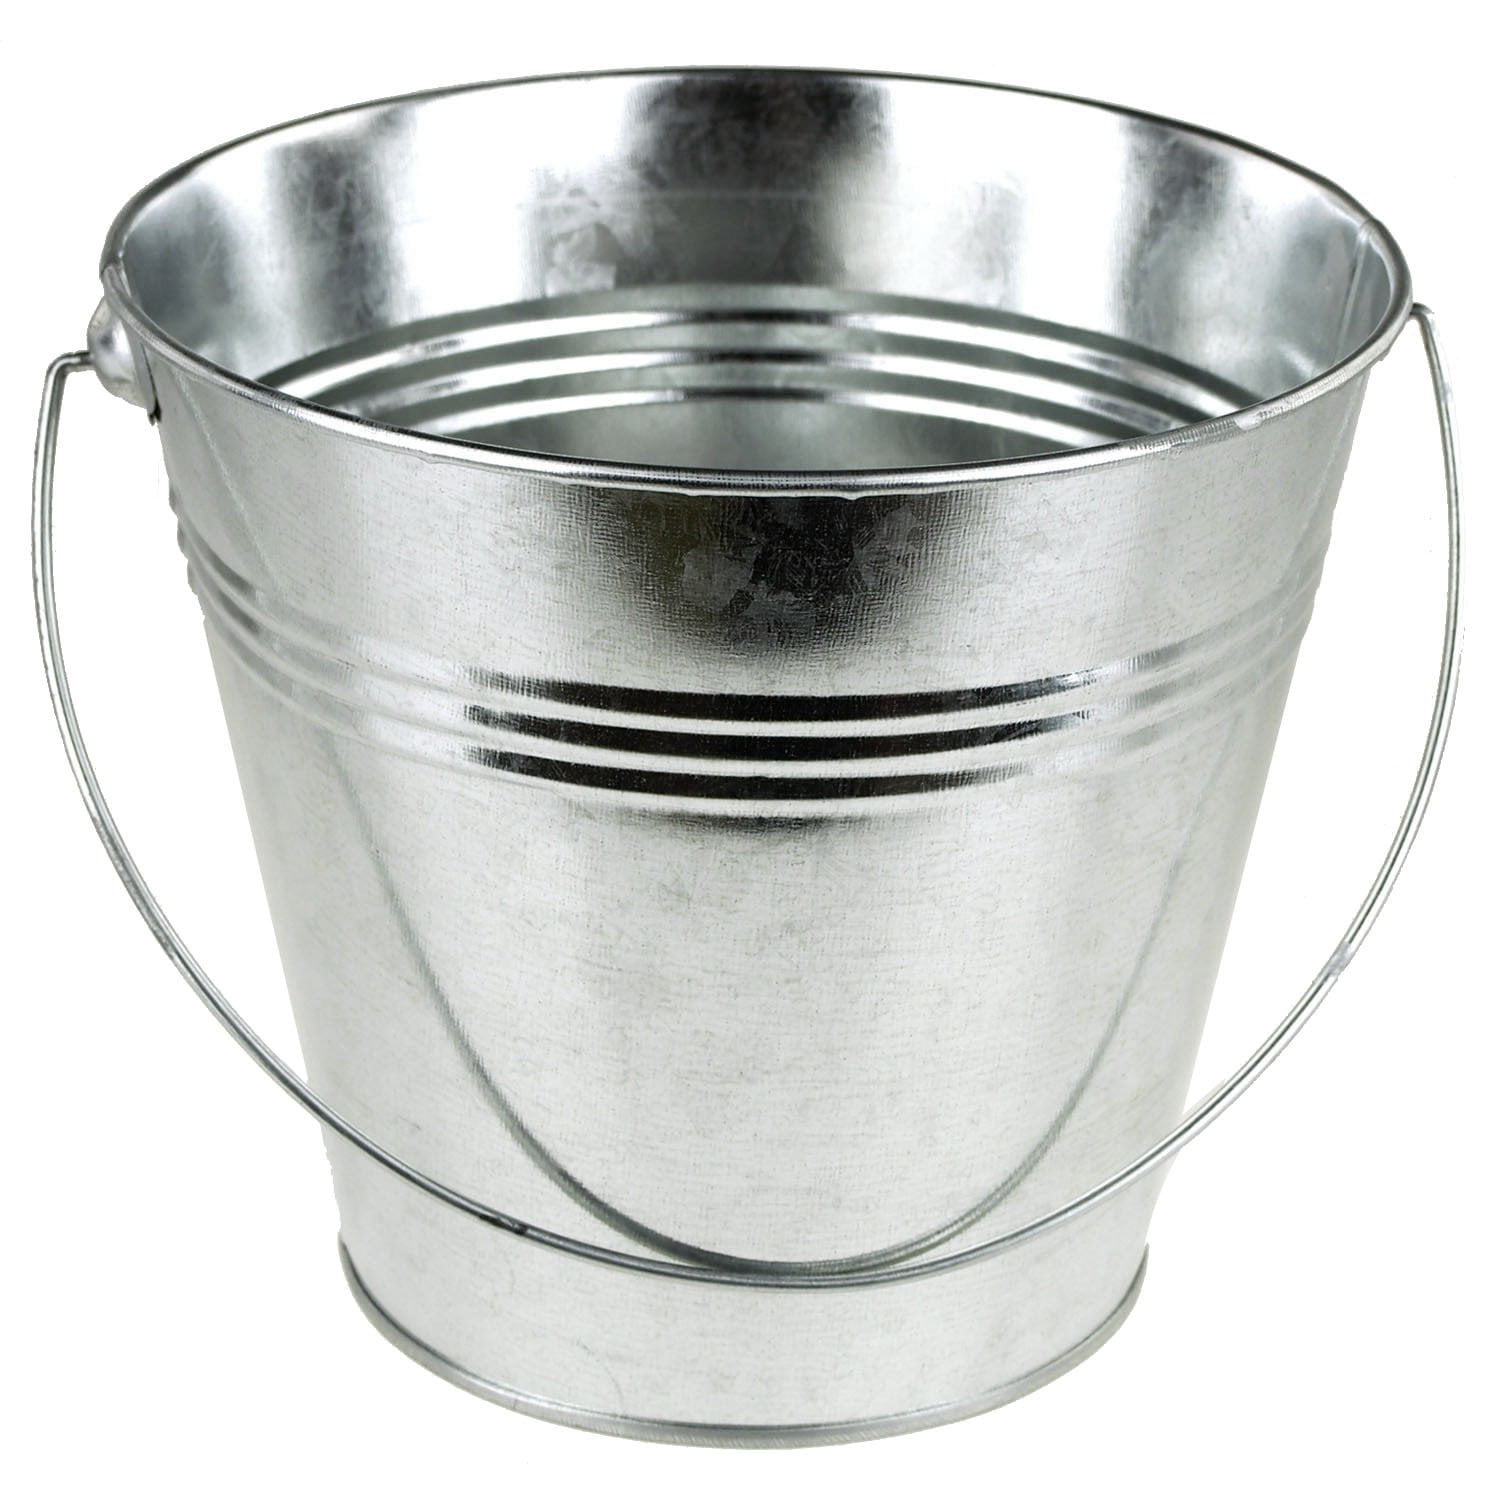 Homeford Firefly Imports Metal Pail Buckets Party Favor, 5-Inch, Silver, 5